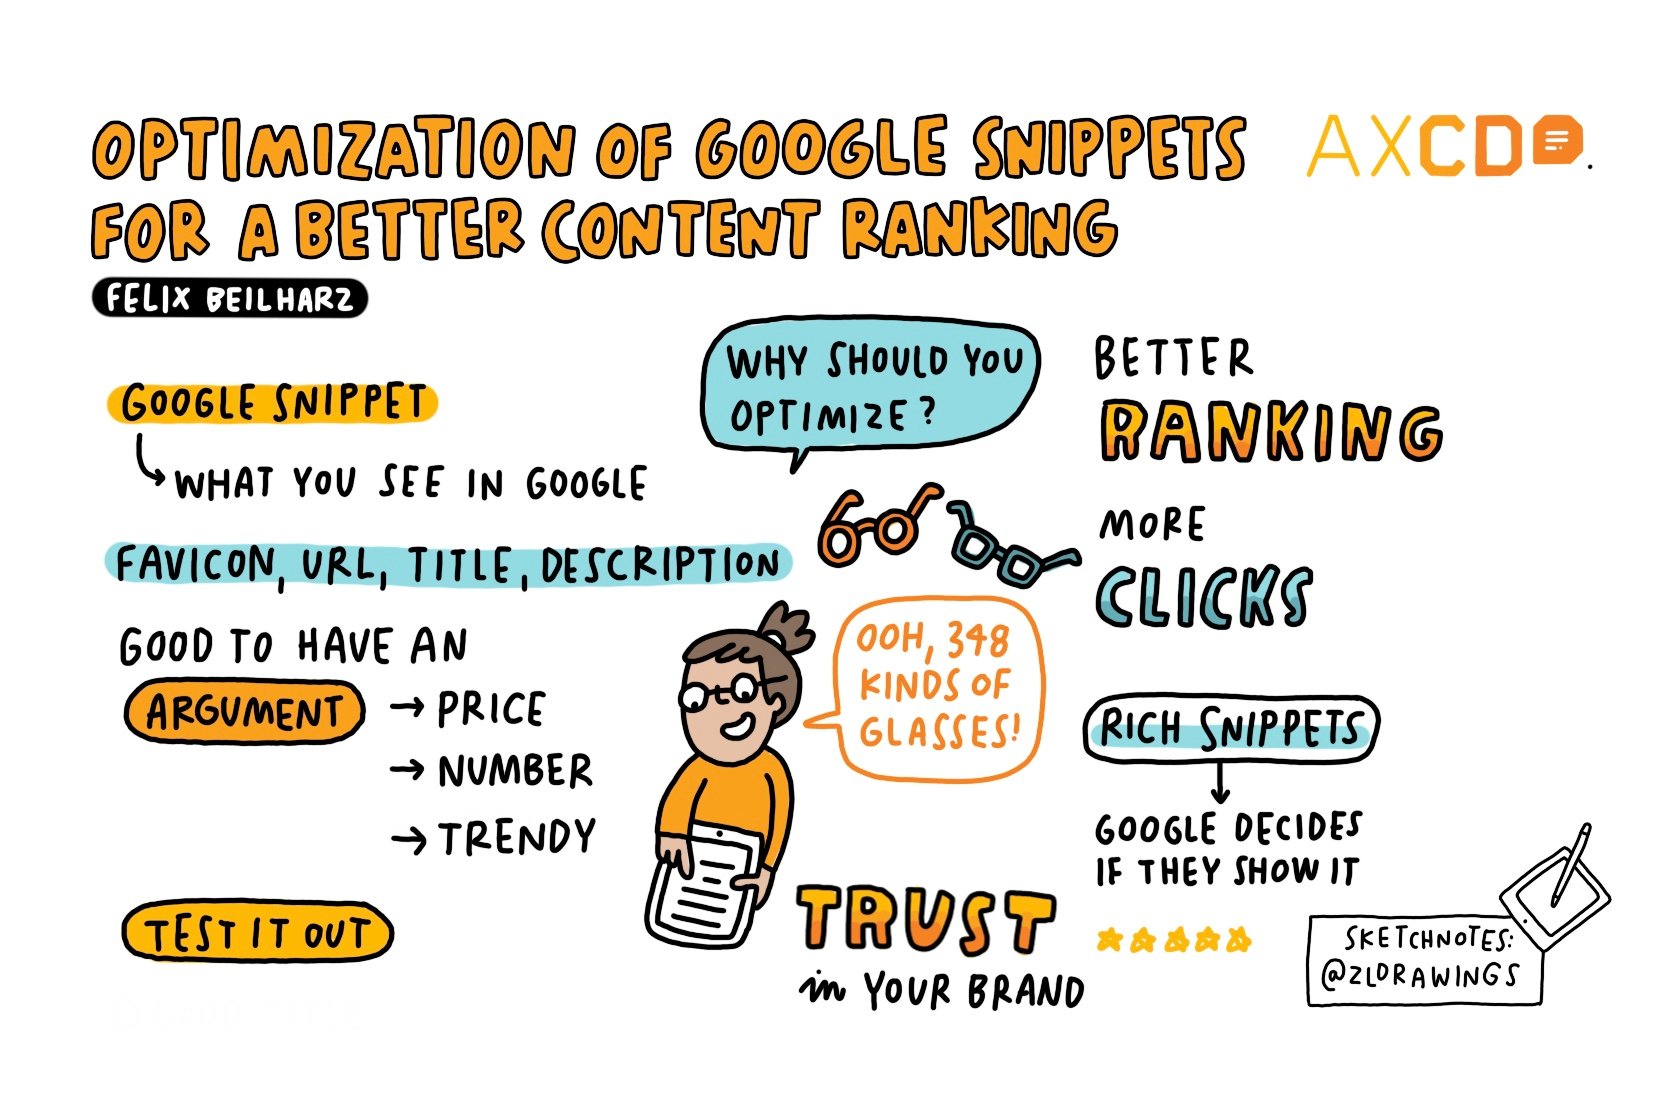 Sketchnote of AXCD talk: optimization of google snippets for a better content ranking